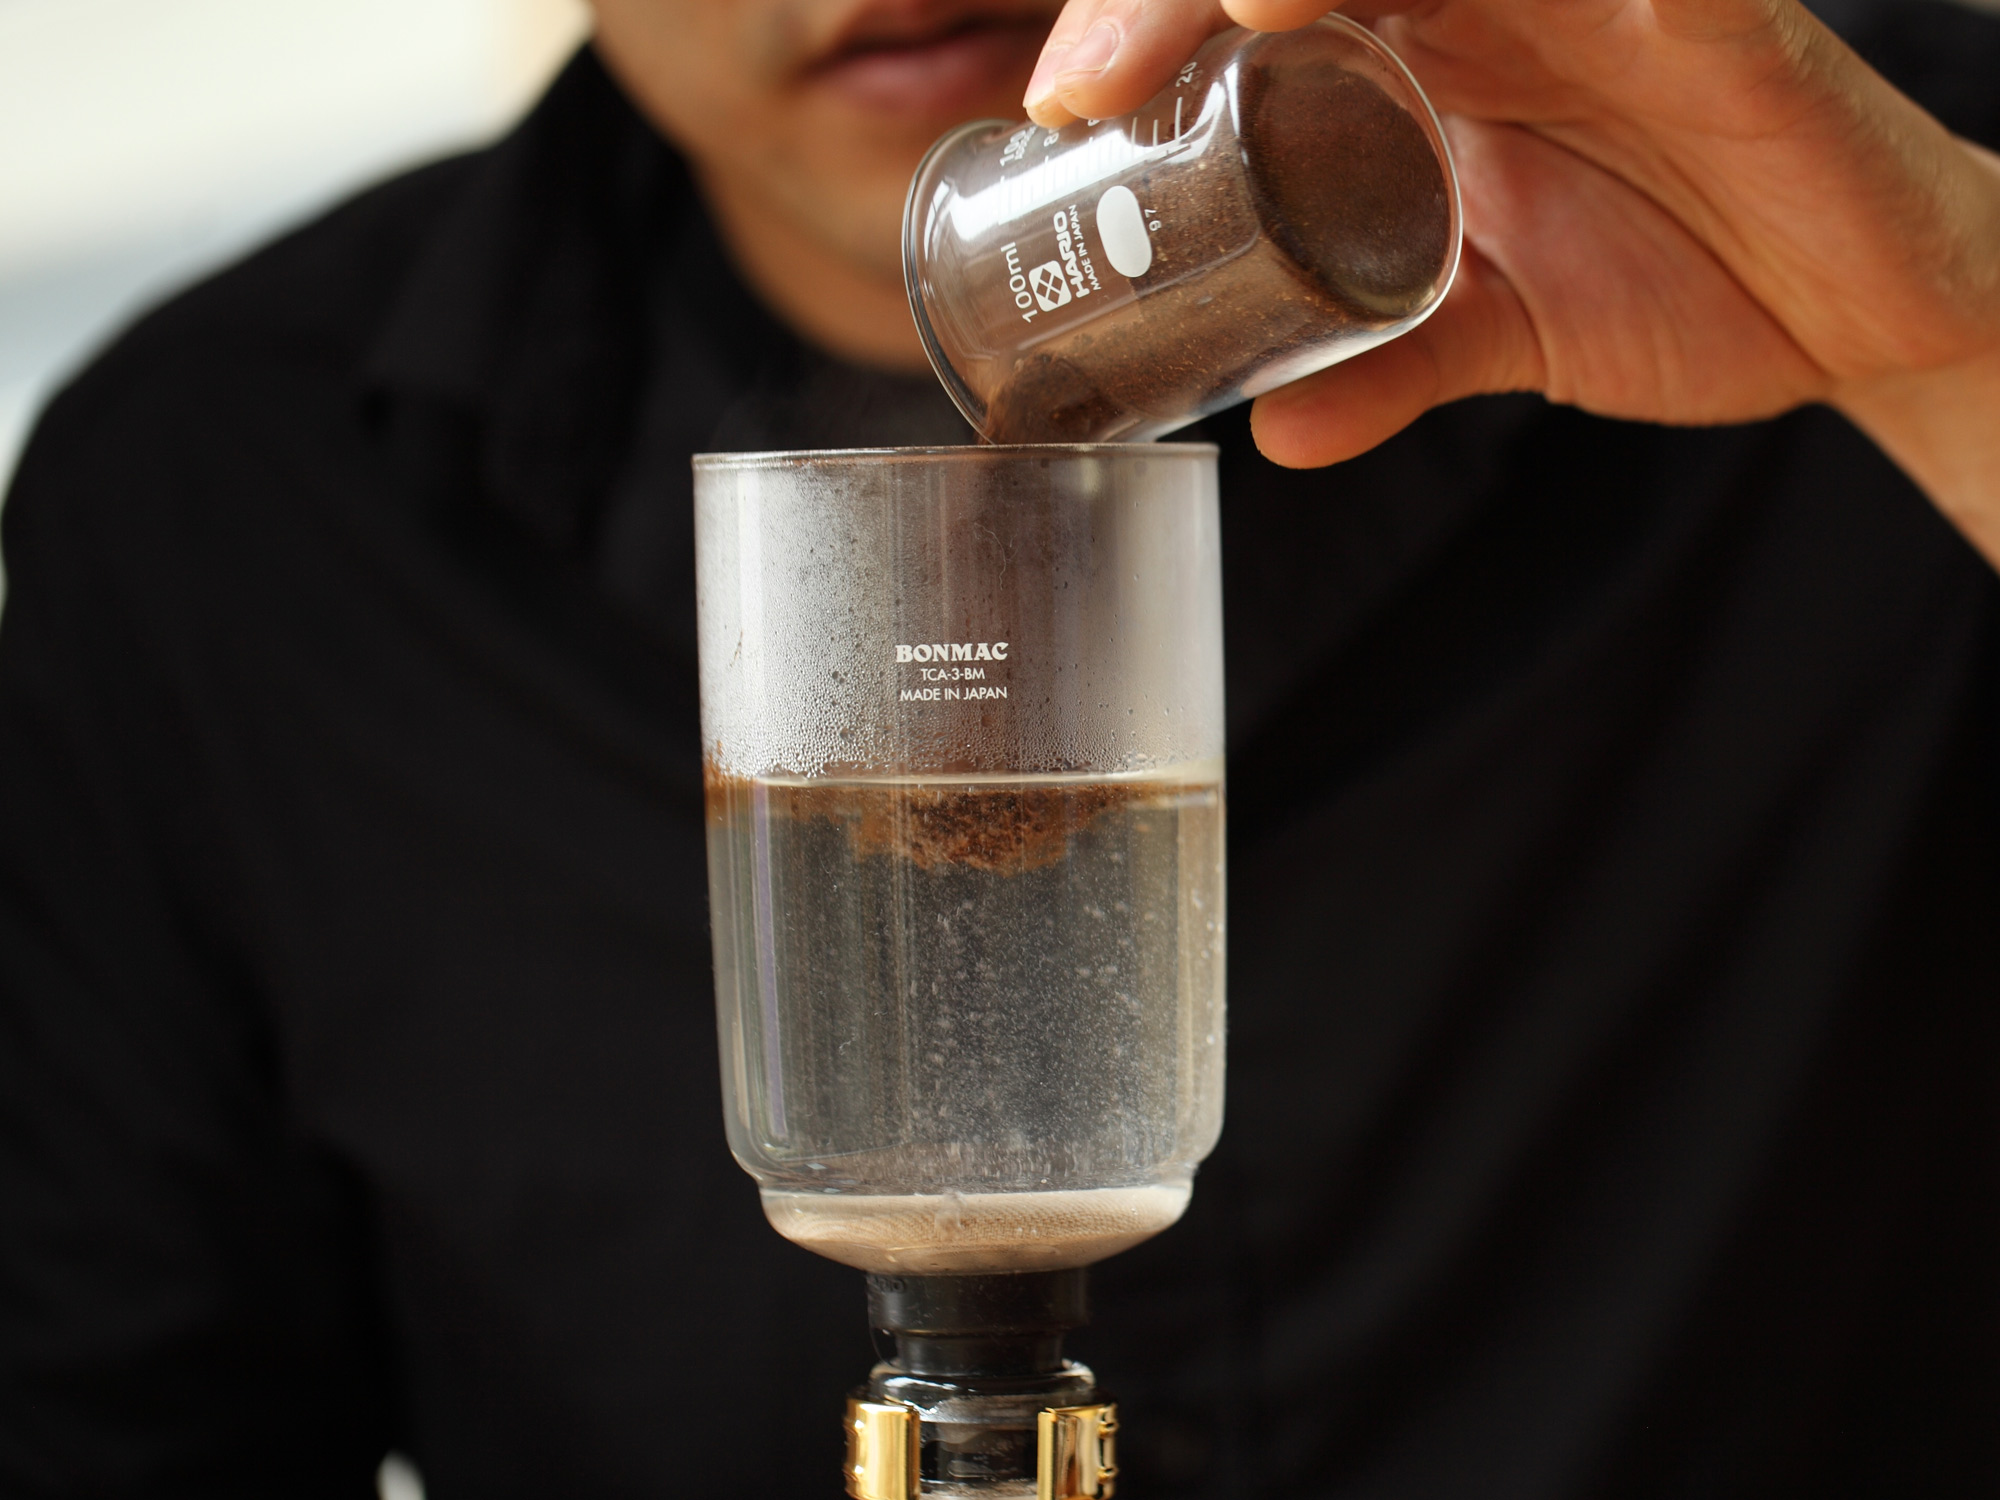 How to Make Coffee With a Vacuum Brewer (and Its Physics) : 12